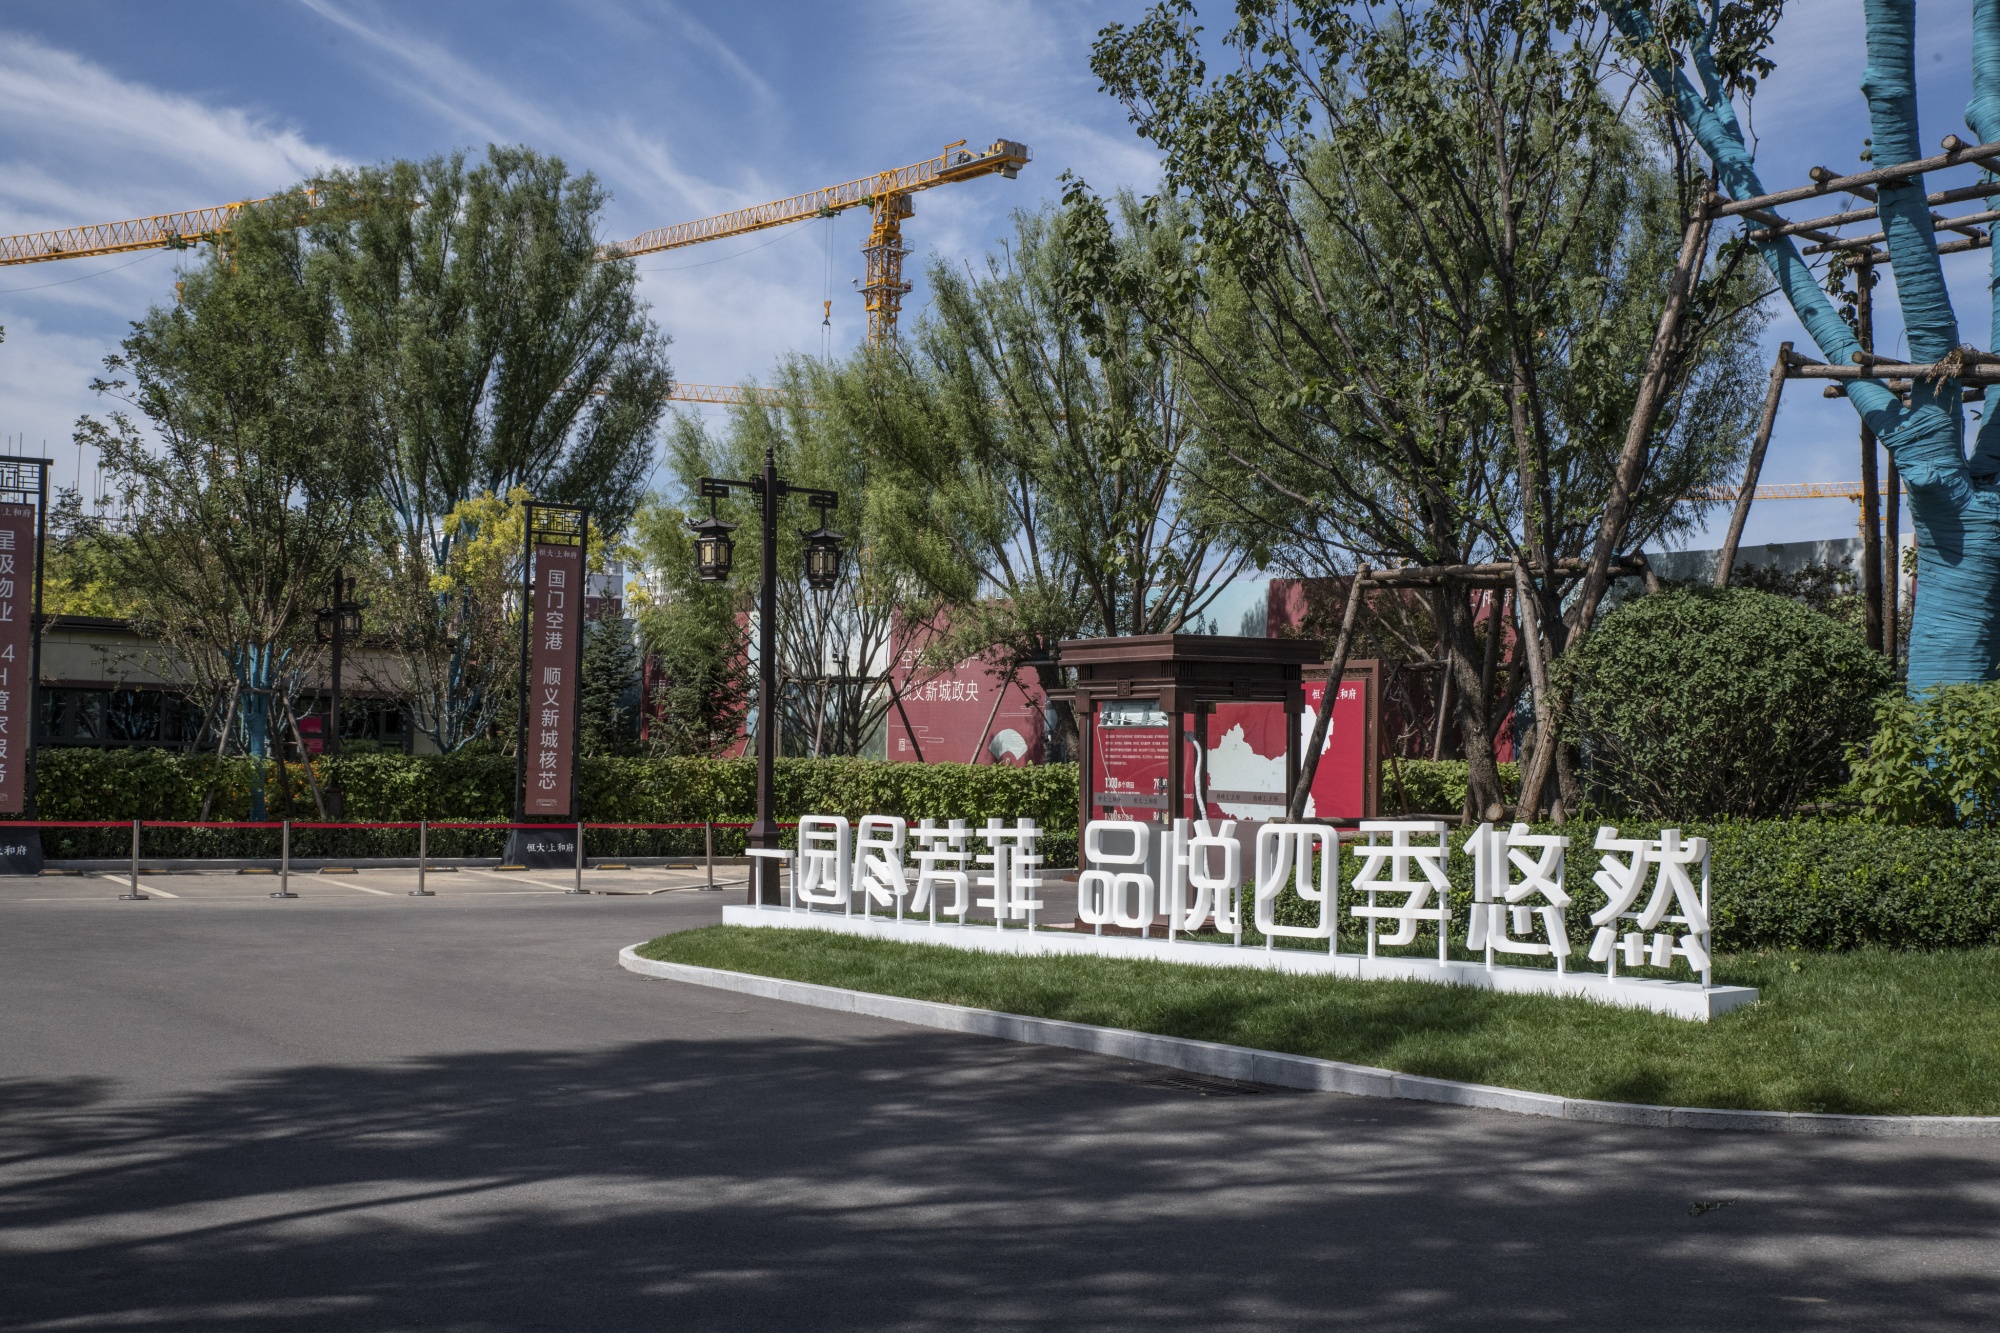 The China Evergrande Group Royal Mansion residential development under construction in Beijing, China.